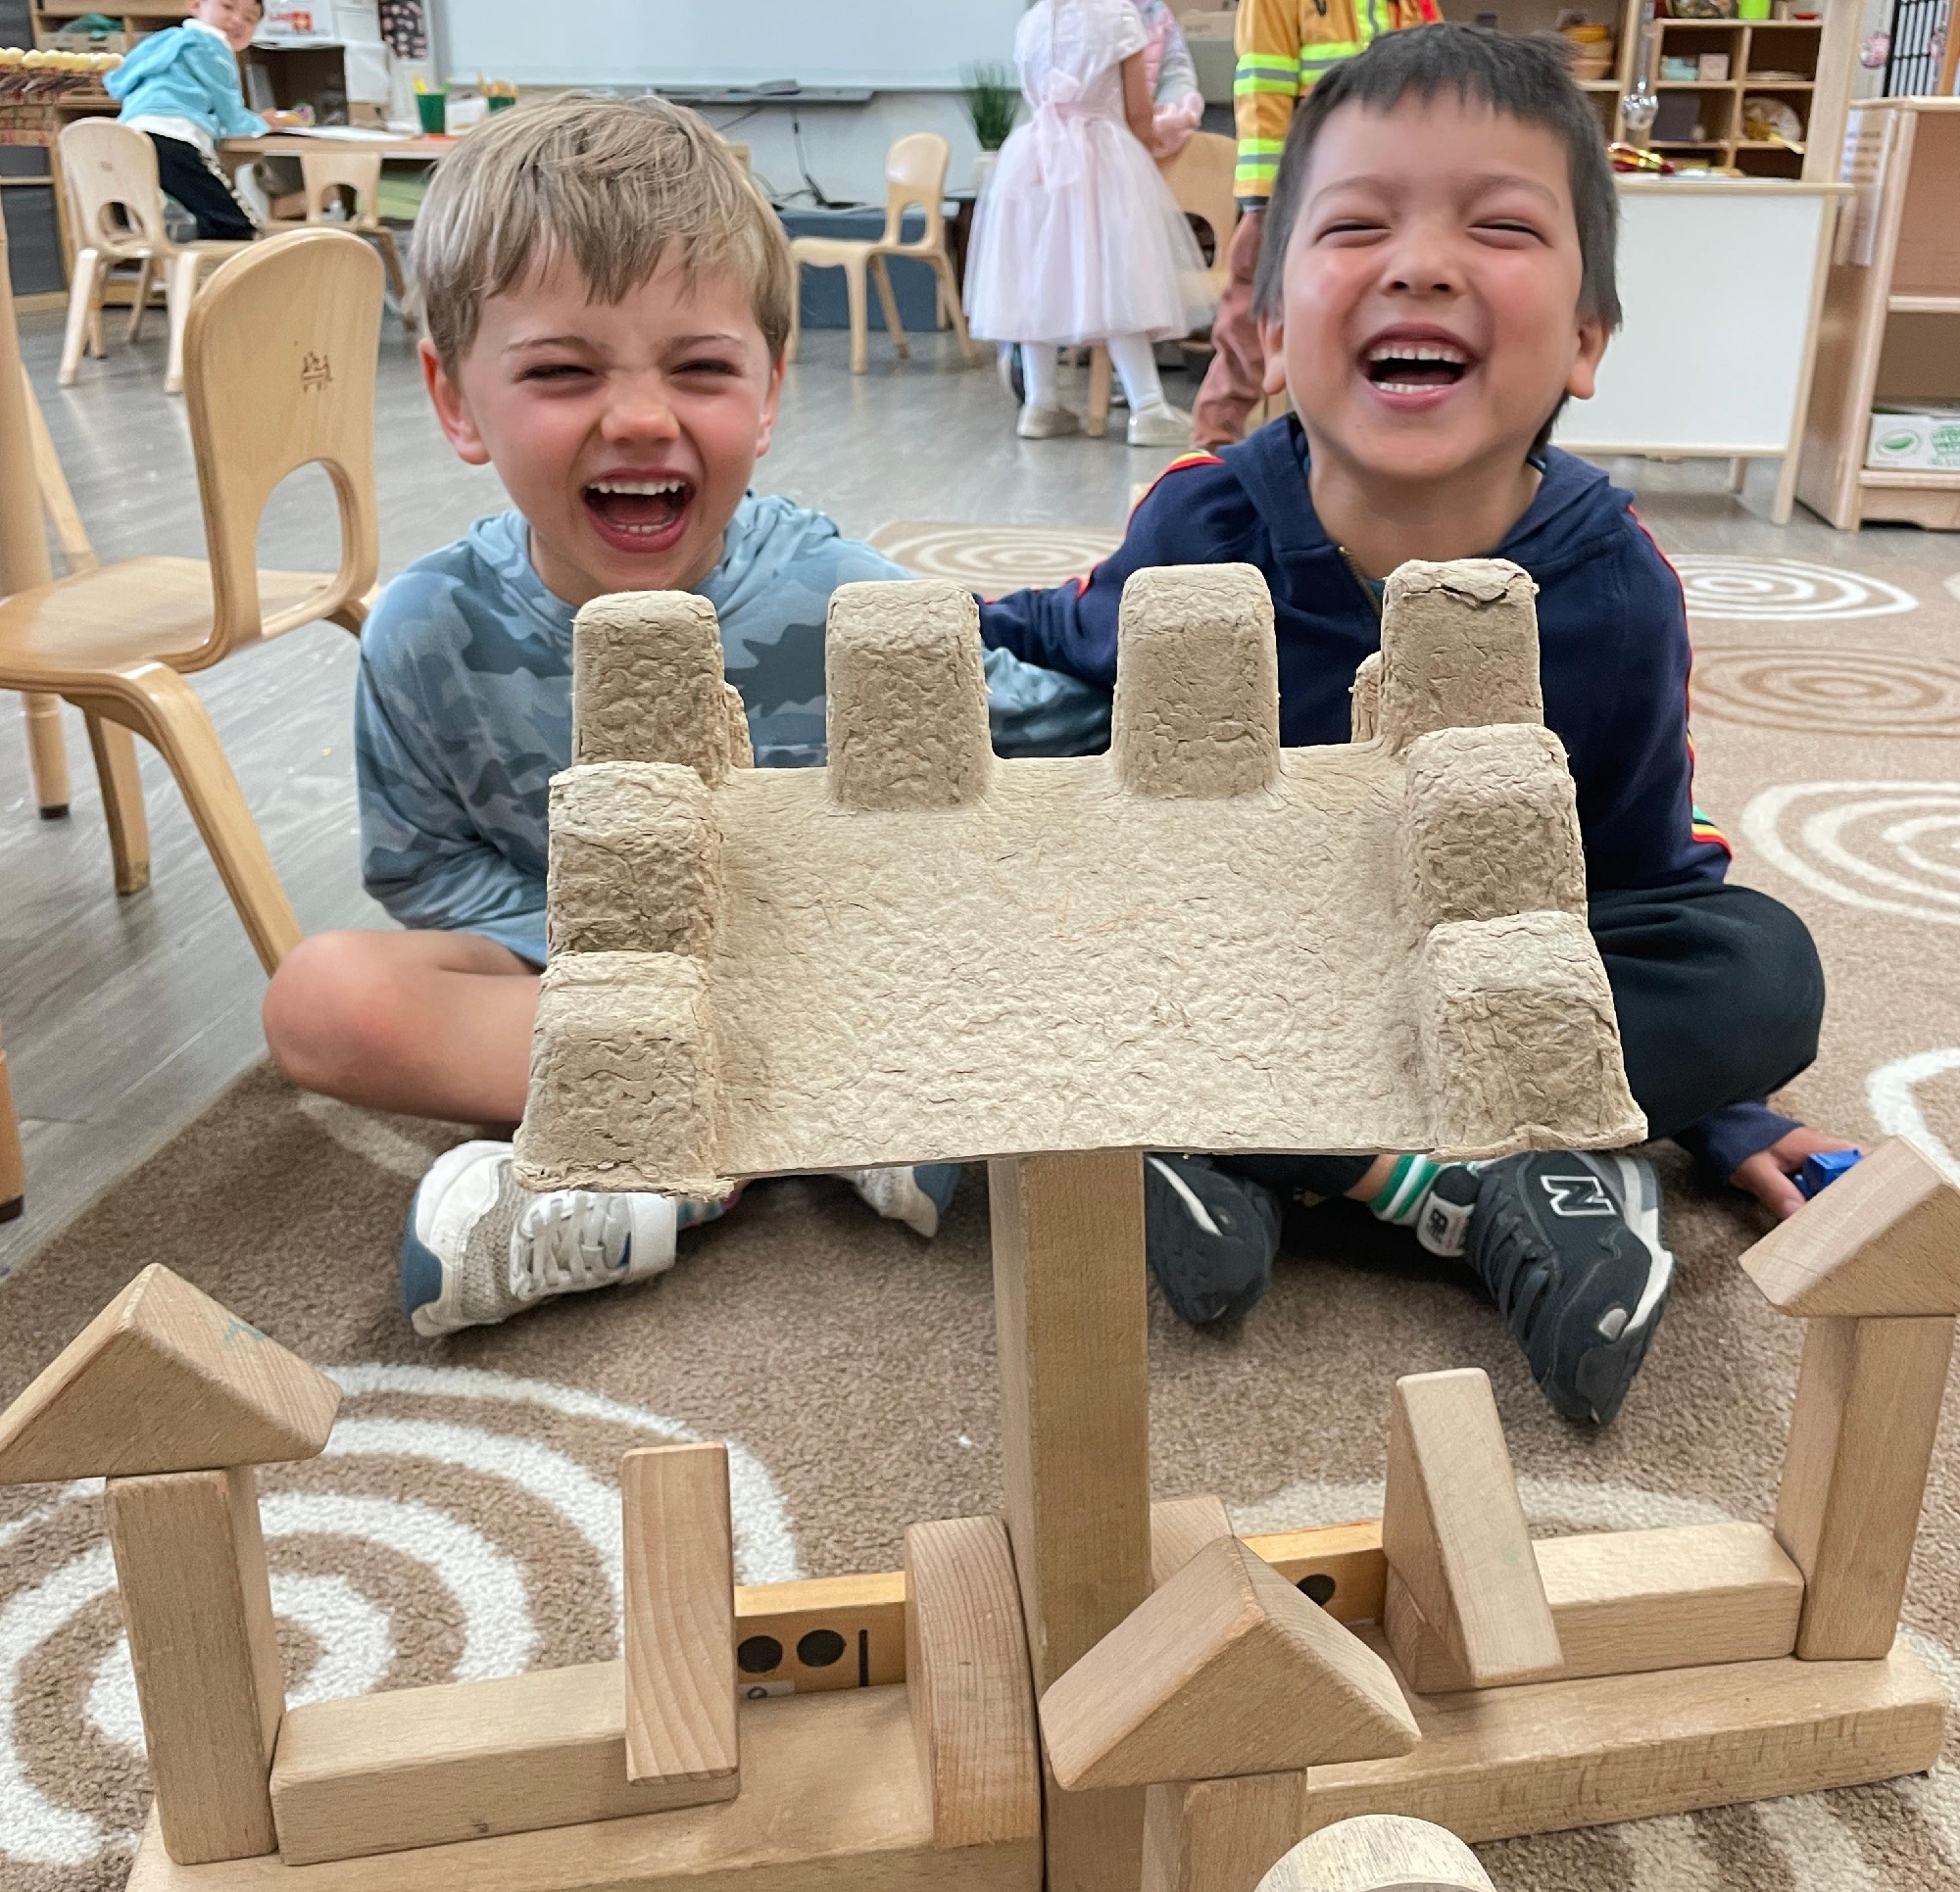 Two Early Years students building a castle out of wooden blocks and a box carton.